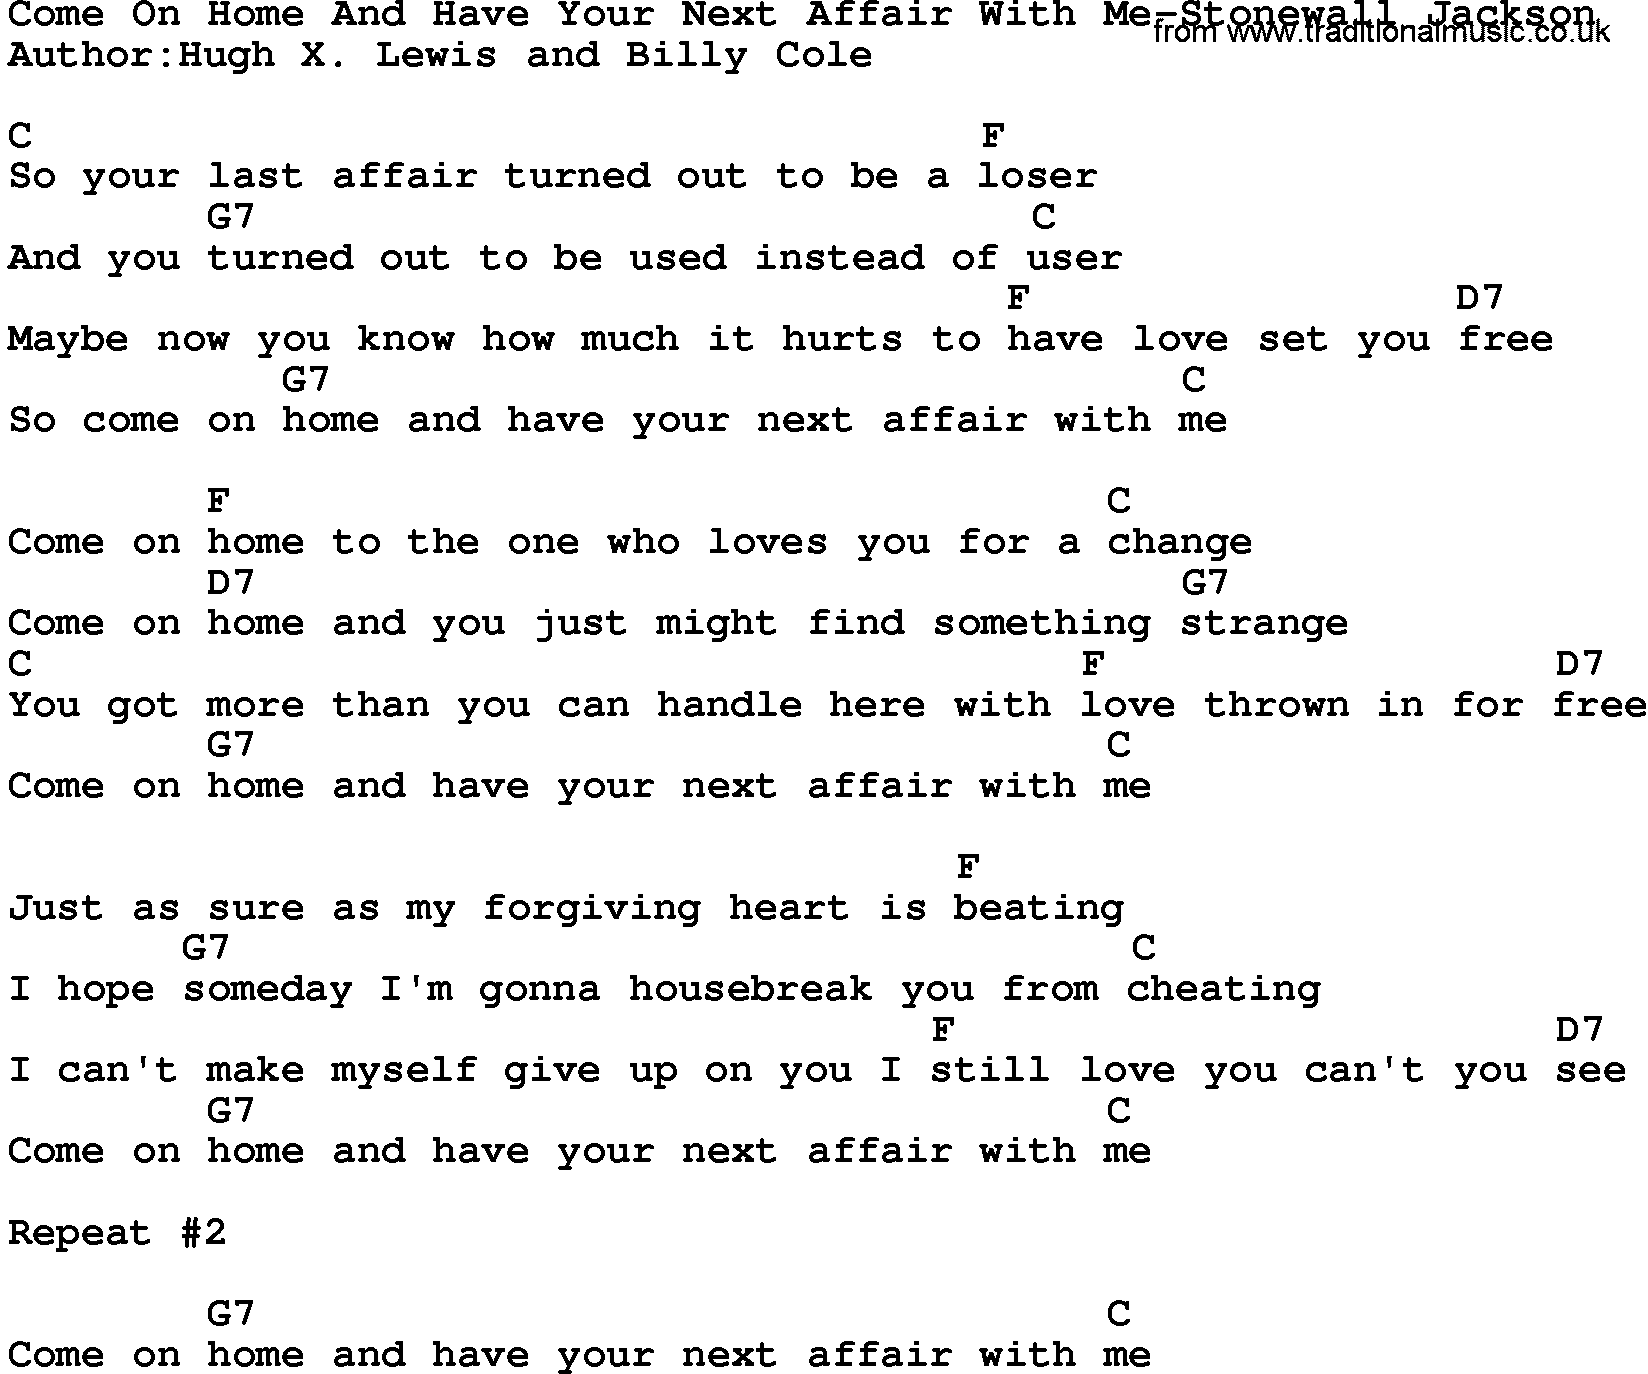 Country music song: Come On Home And Have Your Next Affair With Me-Stonewall Jackson lyrics and chords